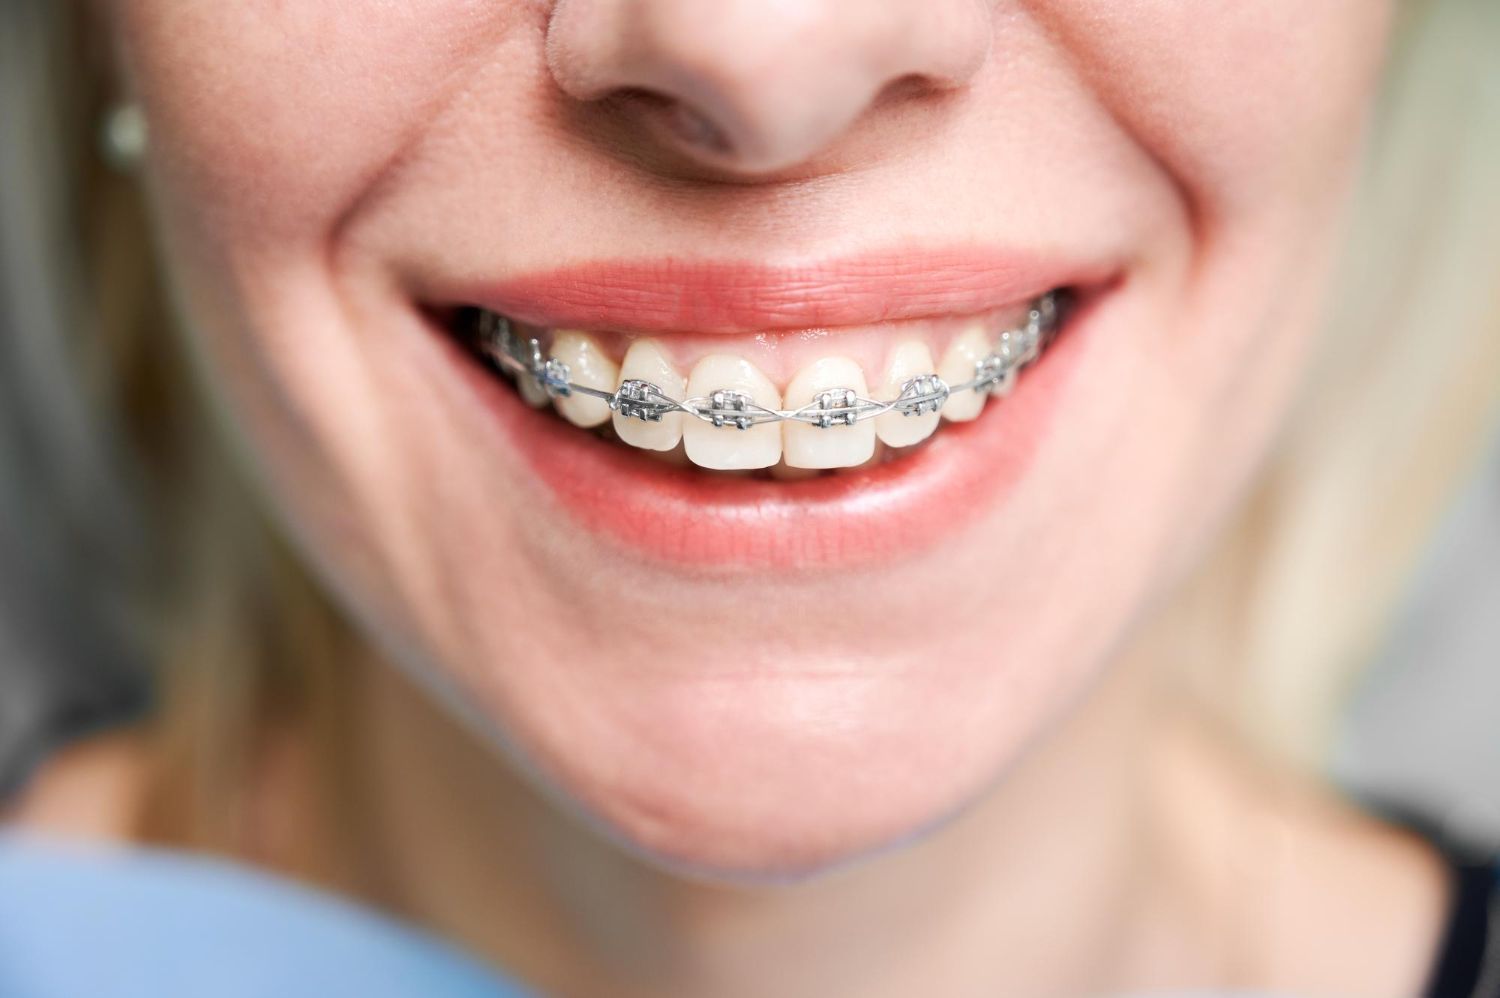 Retainers vs Braces: Which is Best?